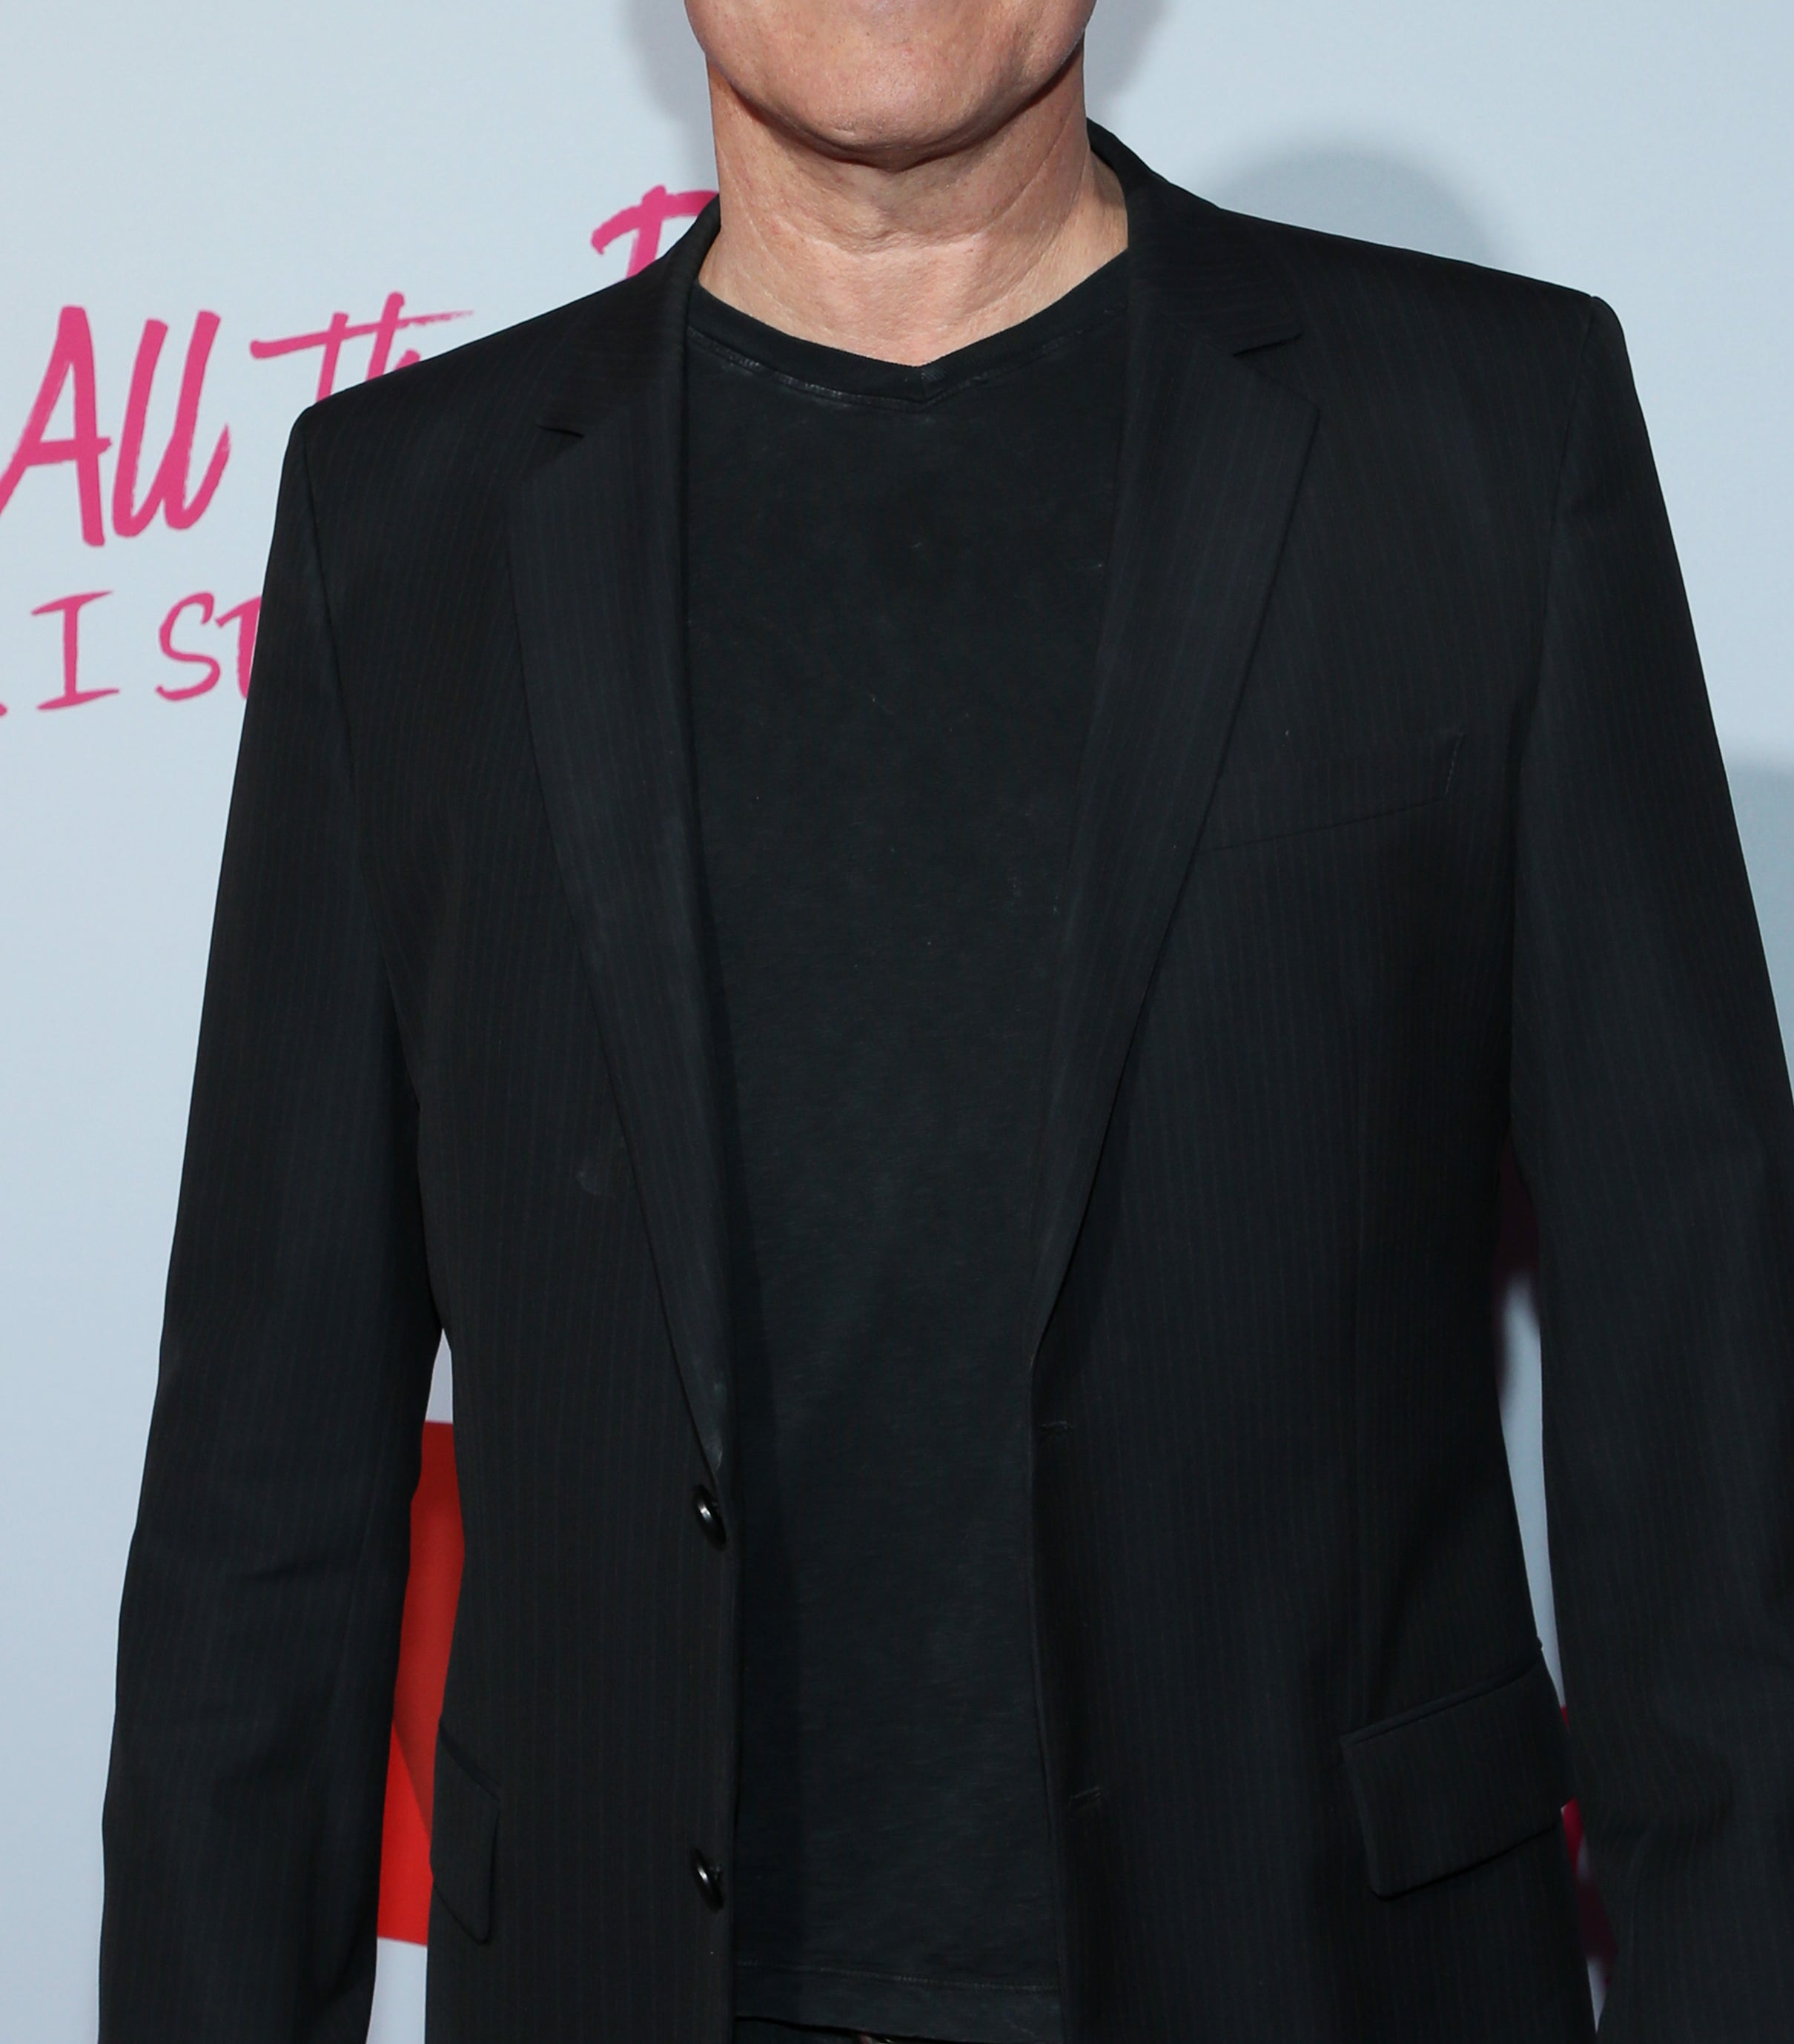 John Corbett stands on the red carpet in a black suit jacket over a black t-shirt at the &quot;To All The Boys: P.S. I Still Love You&quot; premiere event